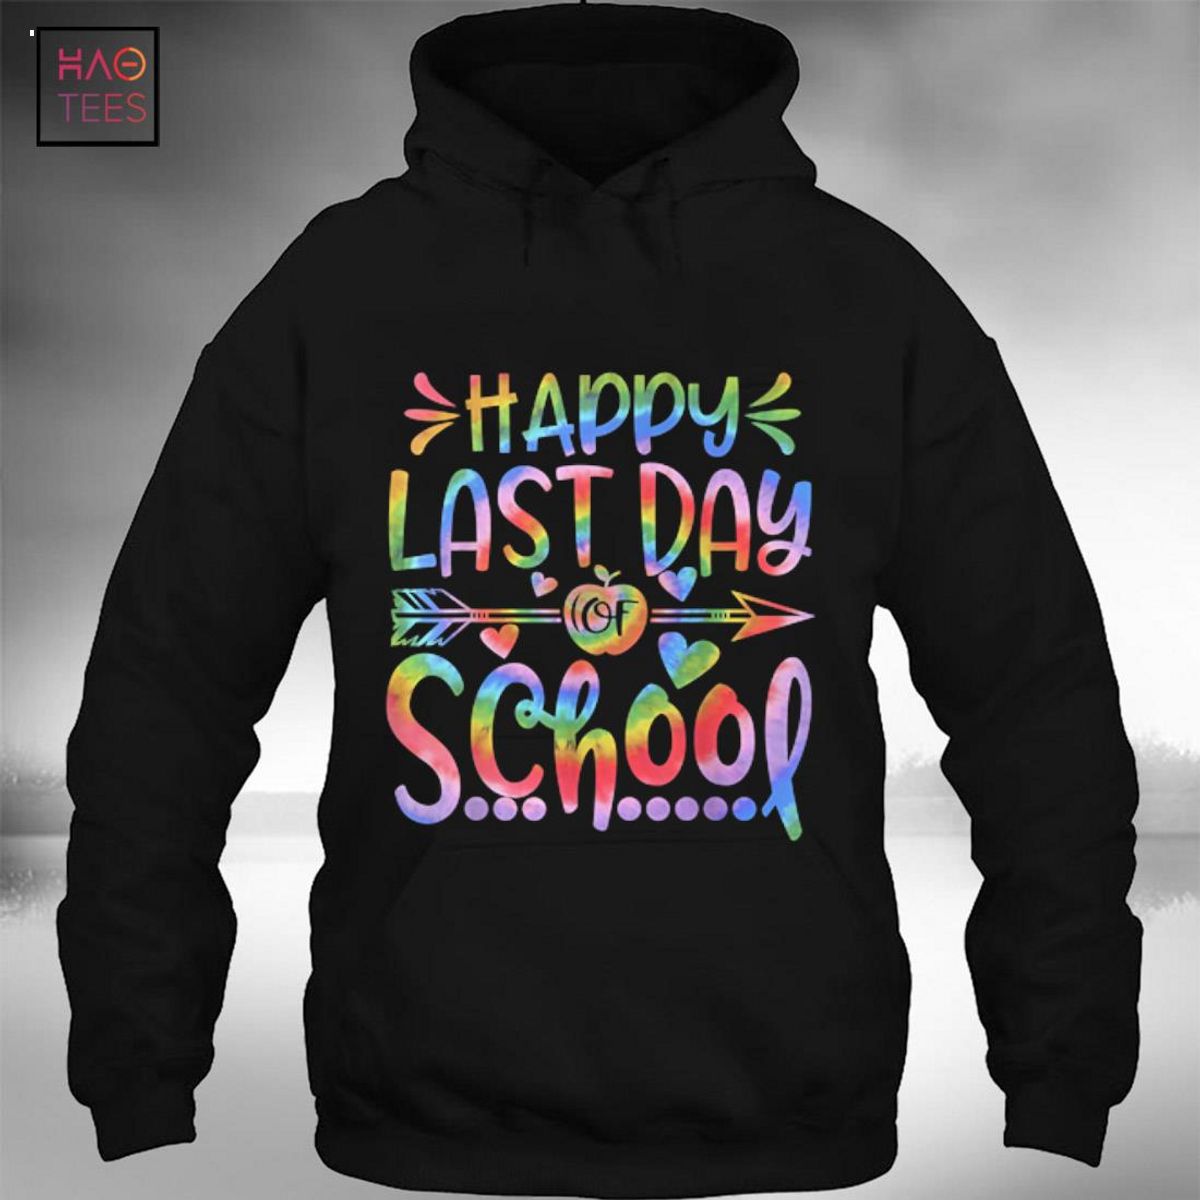 Happy Last Day of School Tie Dye Students and Teachers Gift Shirt